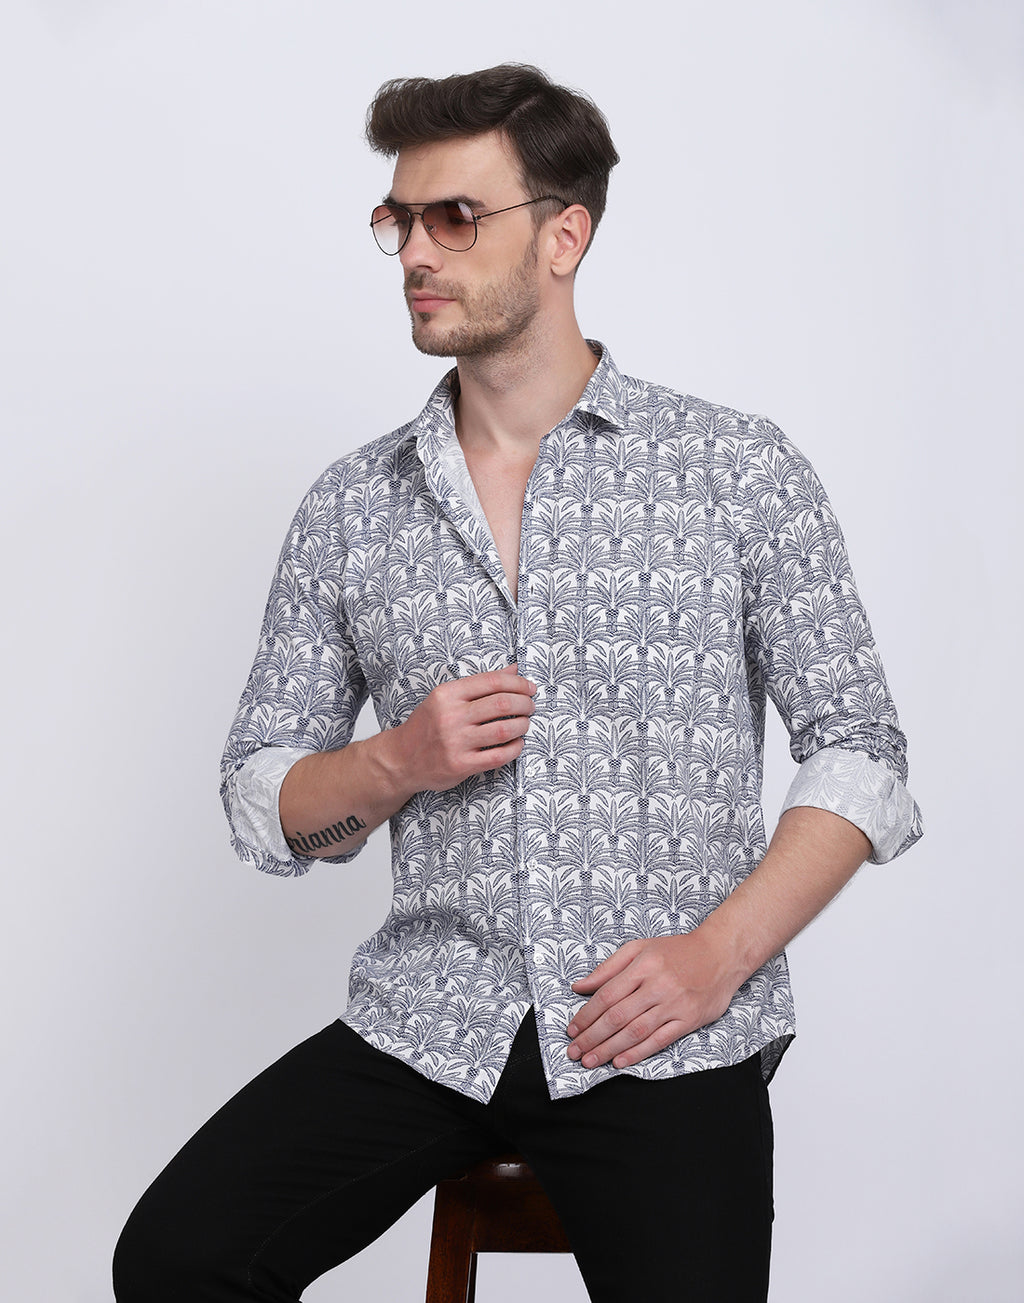 Tropical Printed Regular Fit Casual/Party Shirt